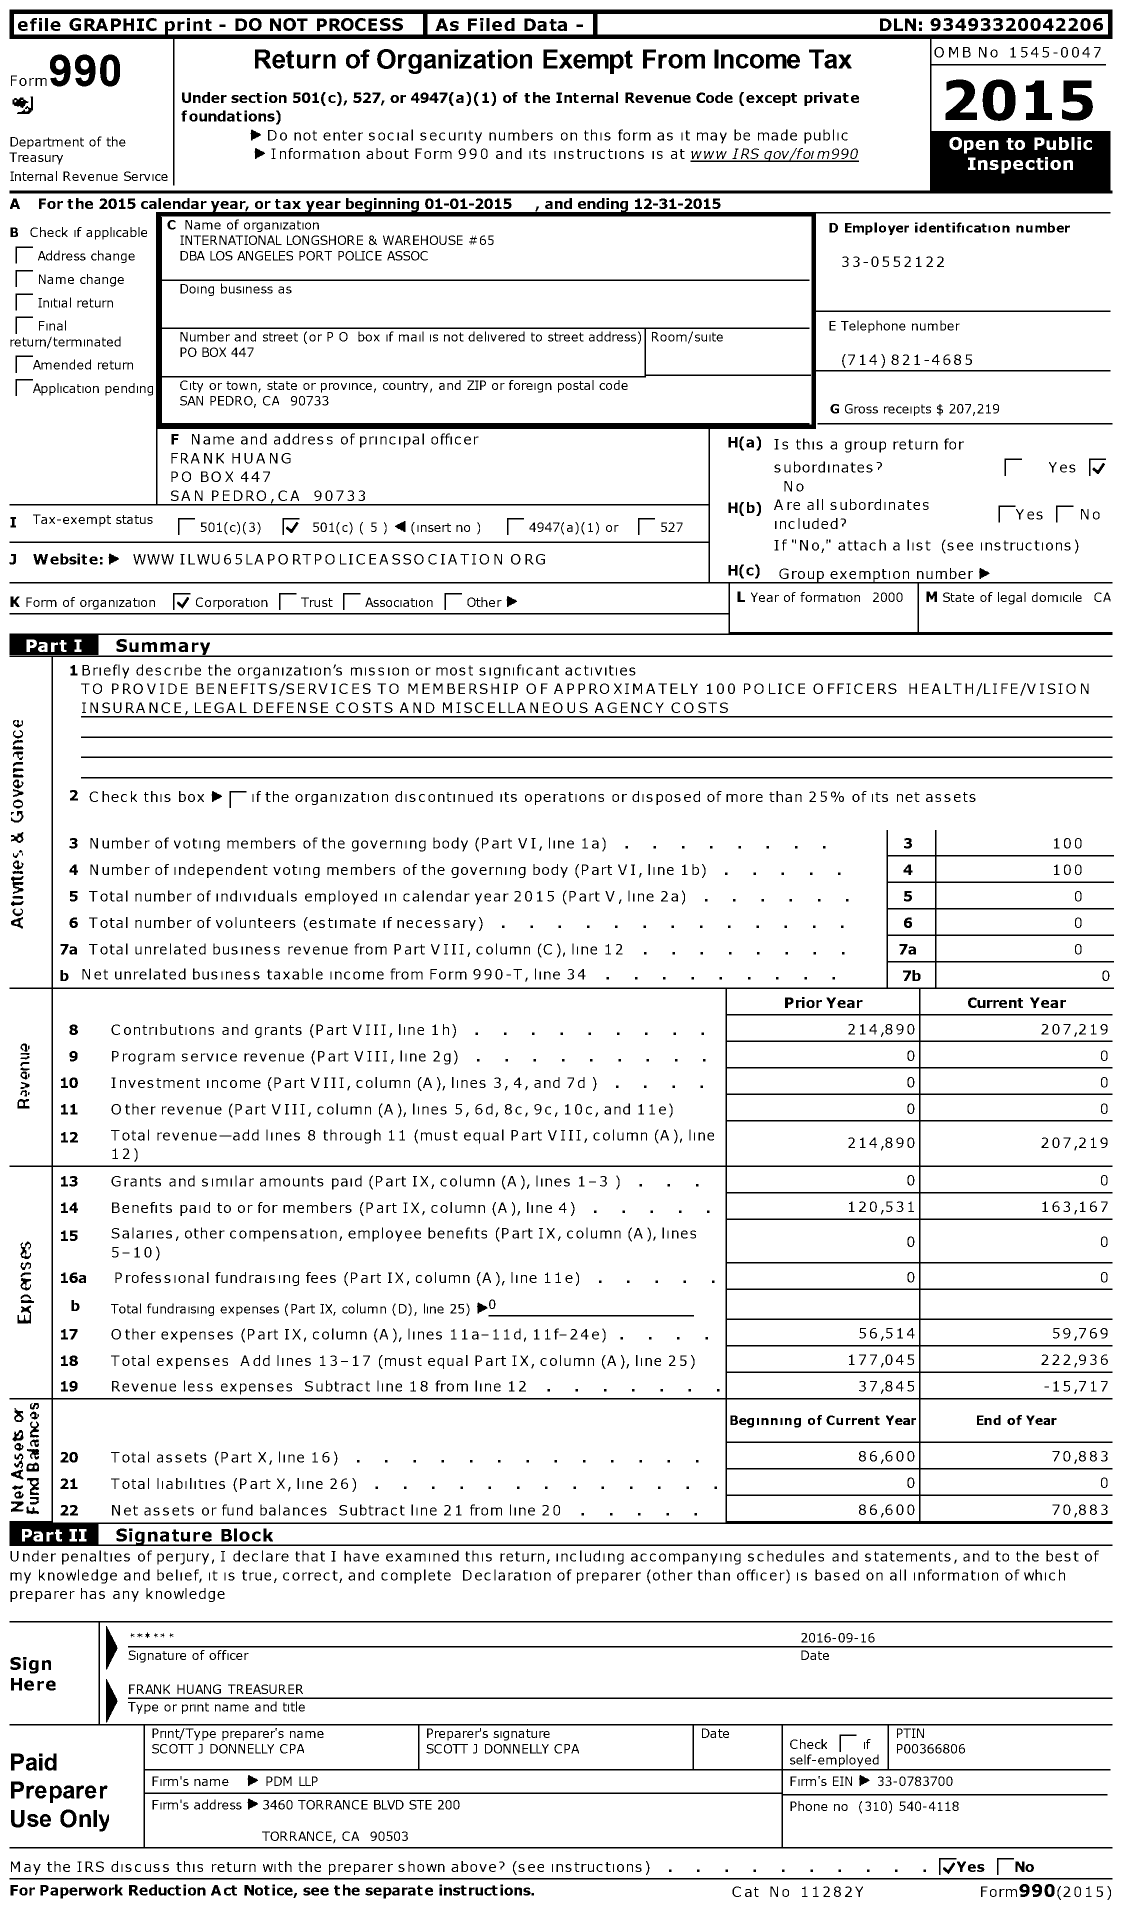 Image of first page of 2015 Form 990O for International Longshore & Warehouse Union - 65 Ilwu